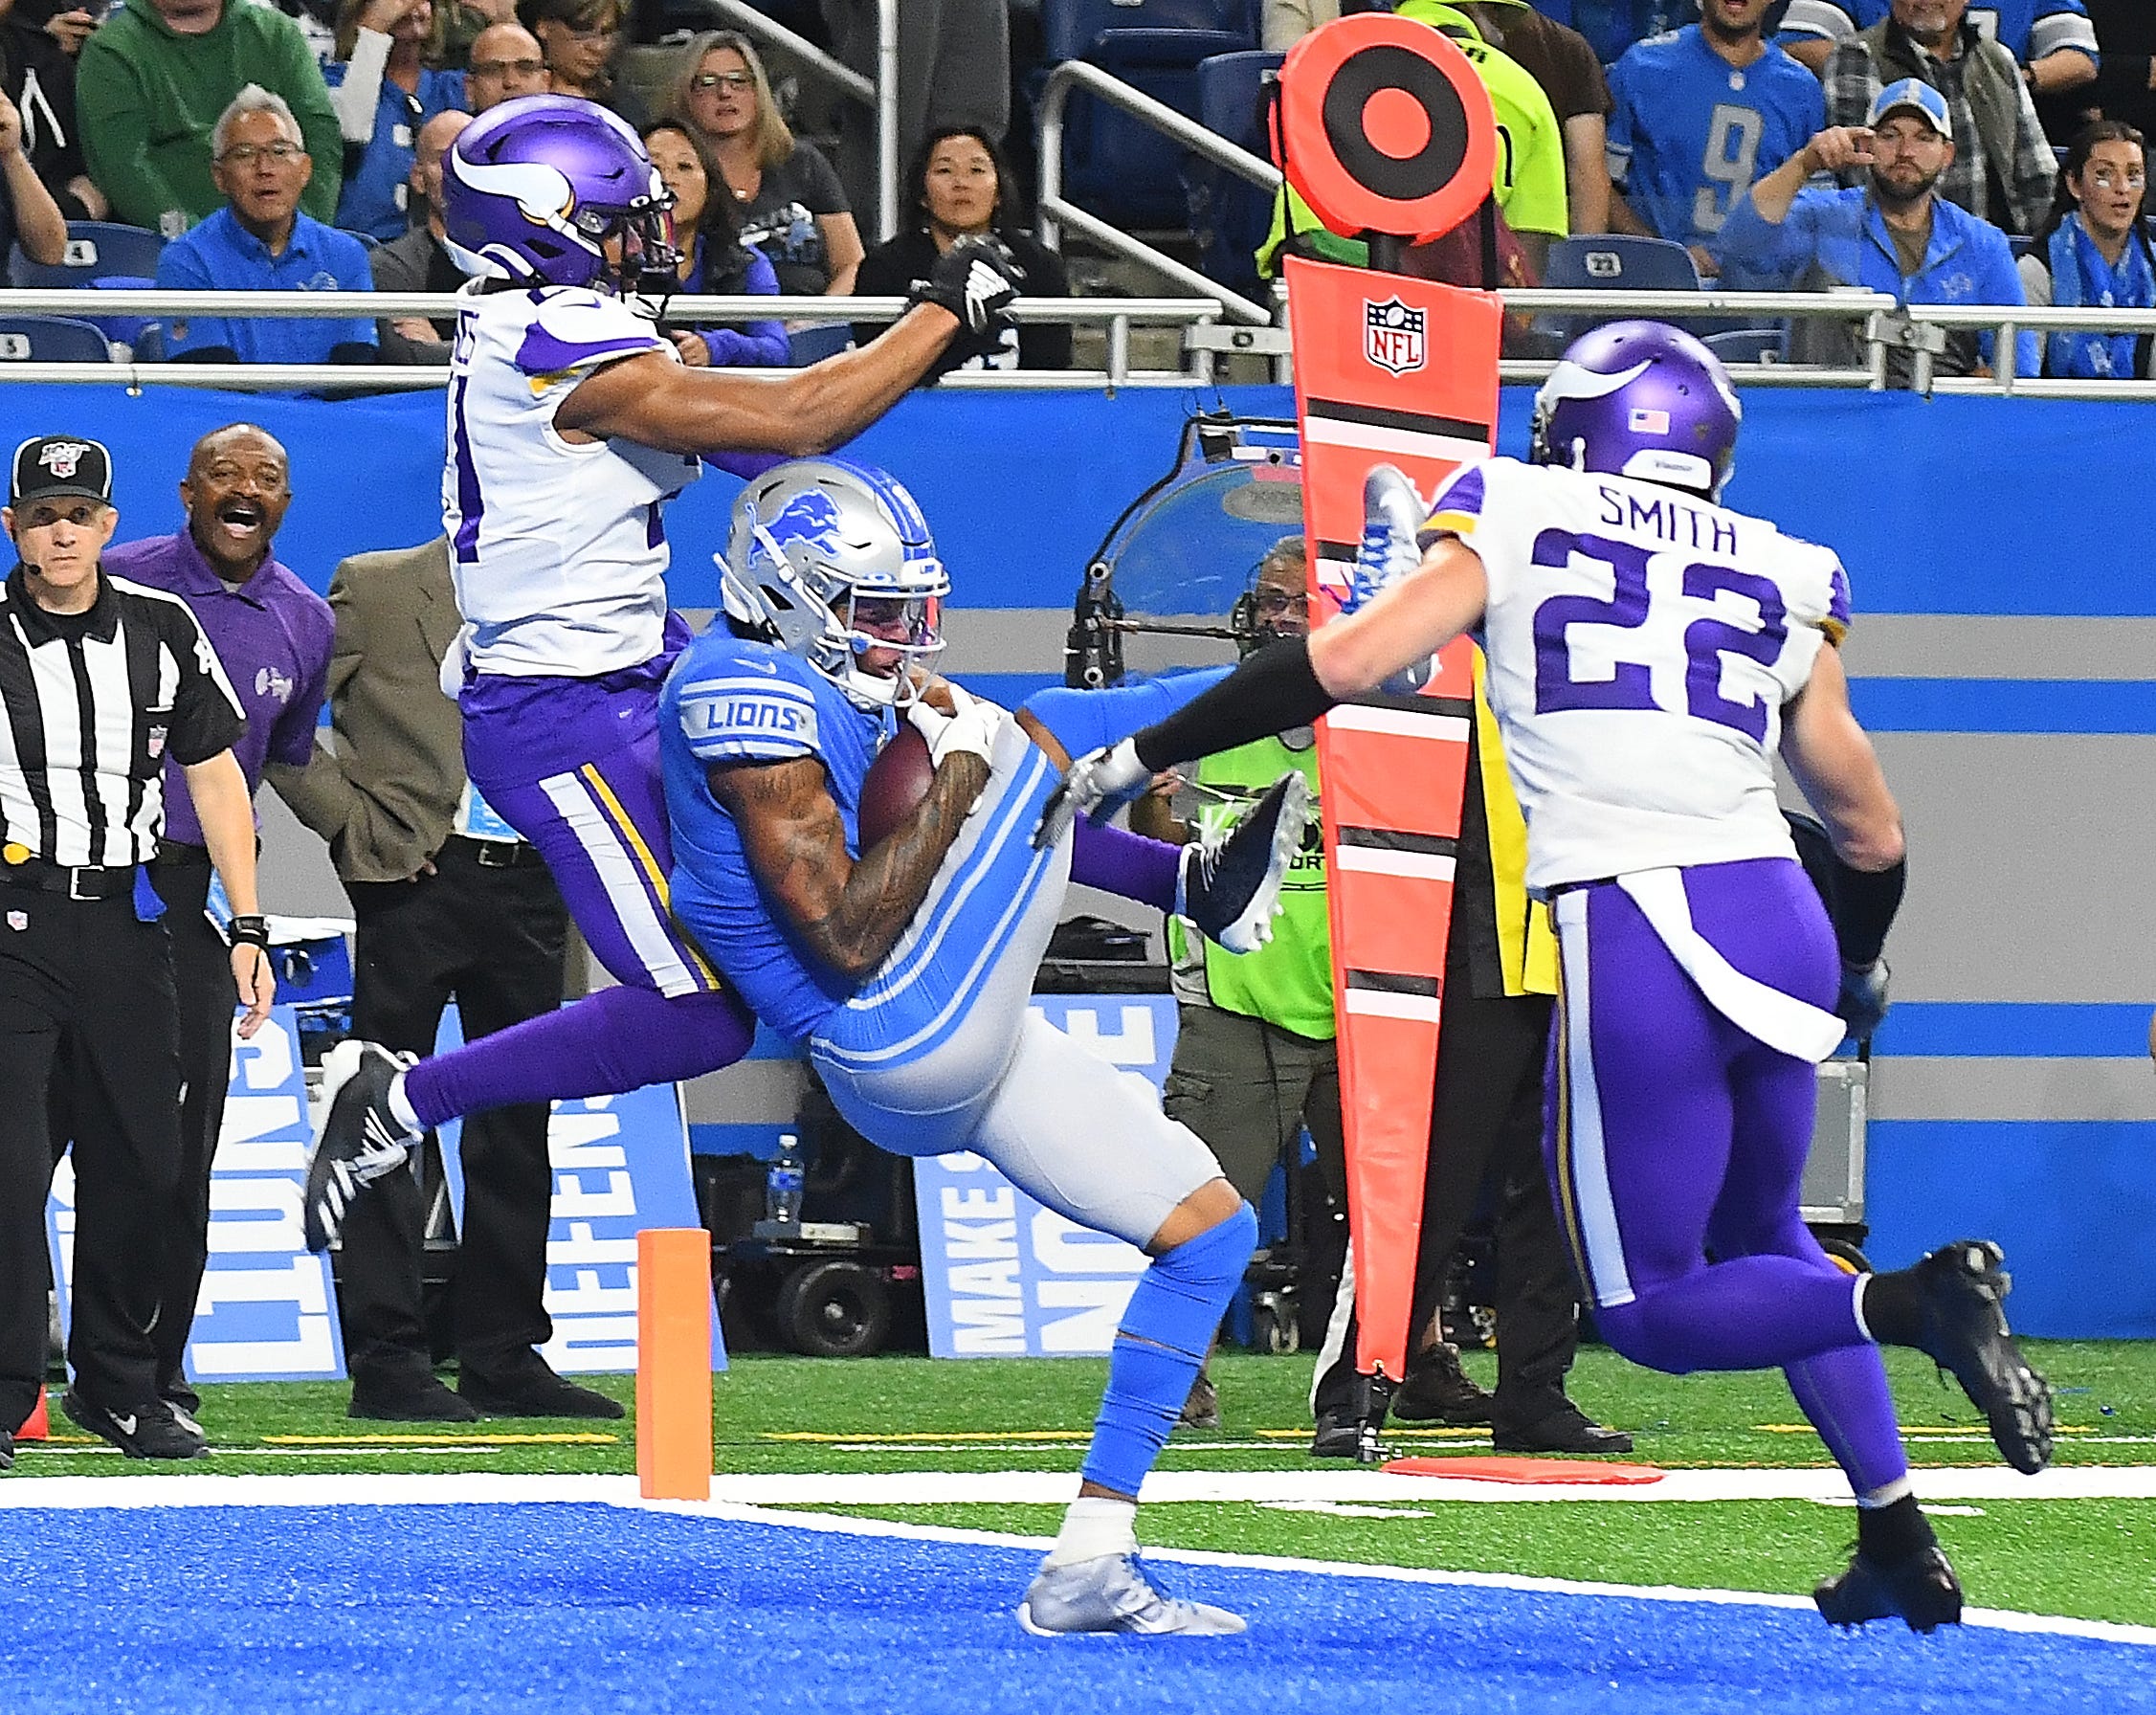 Lions receiver Marvin Jones completes his third touchdown reception, this one in the second quarter, in front of Vikings ' Mike Hughes.